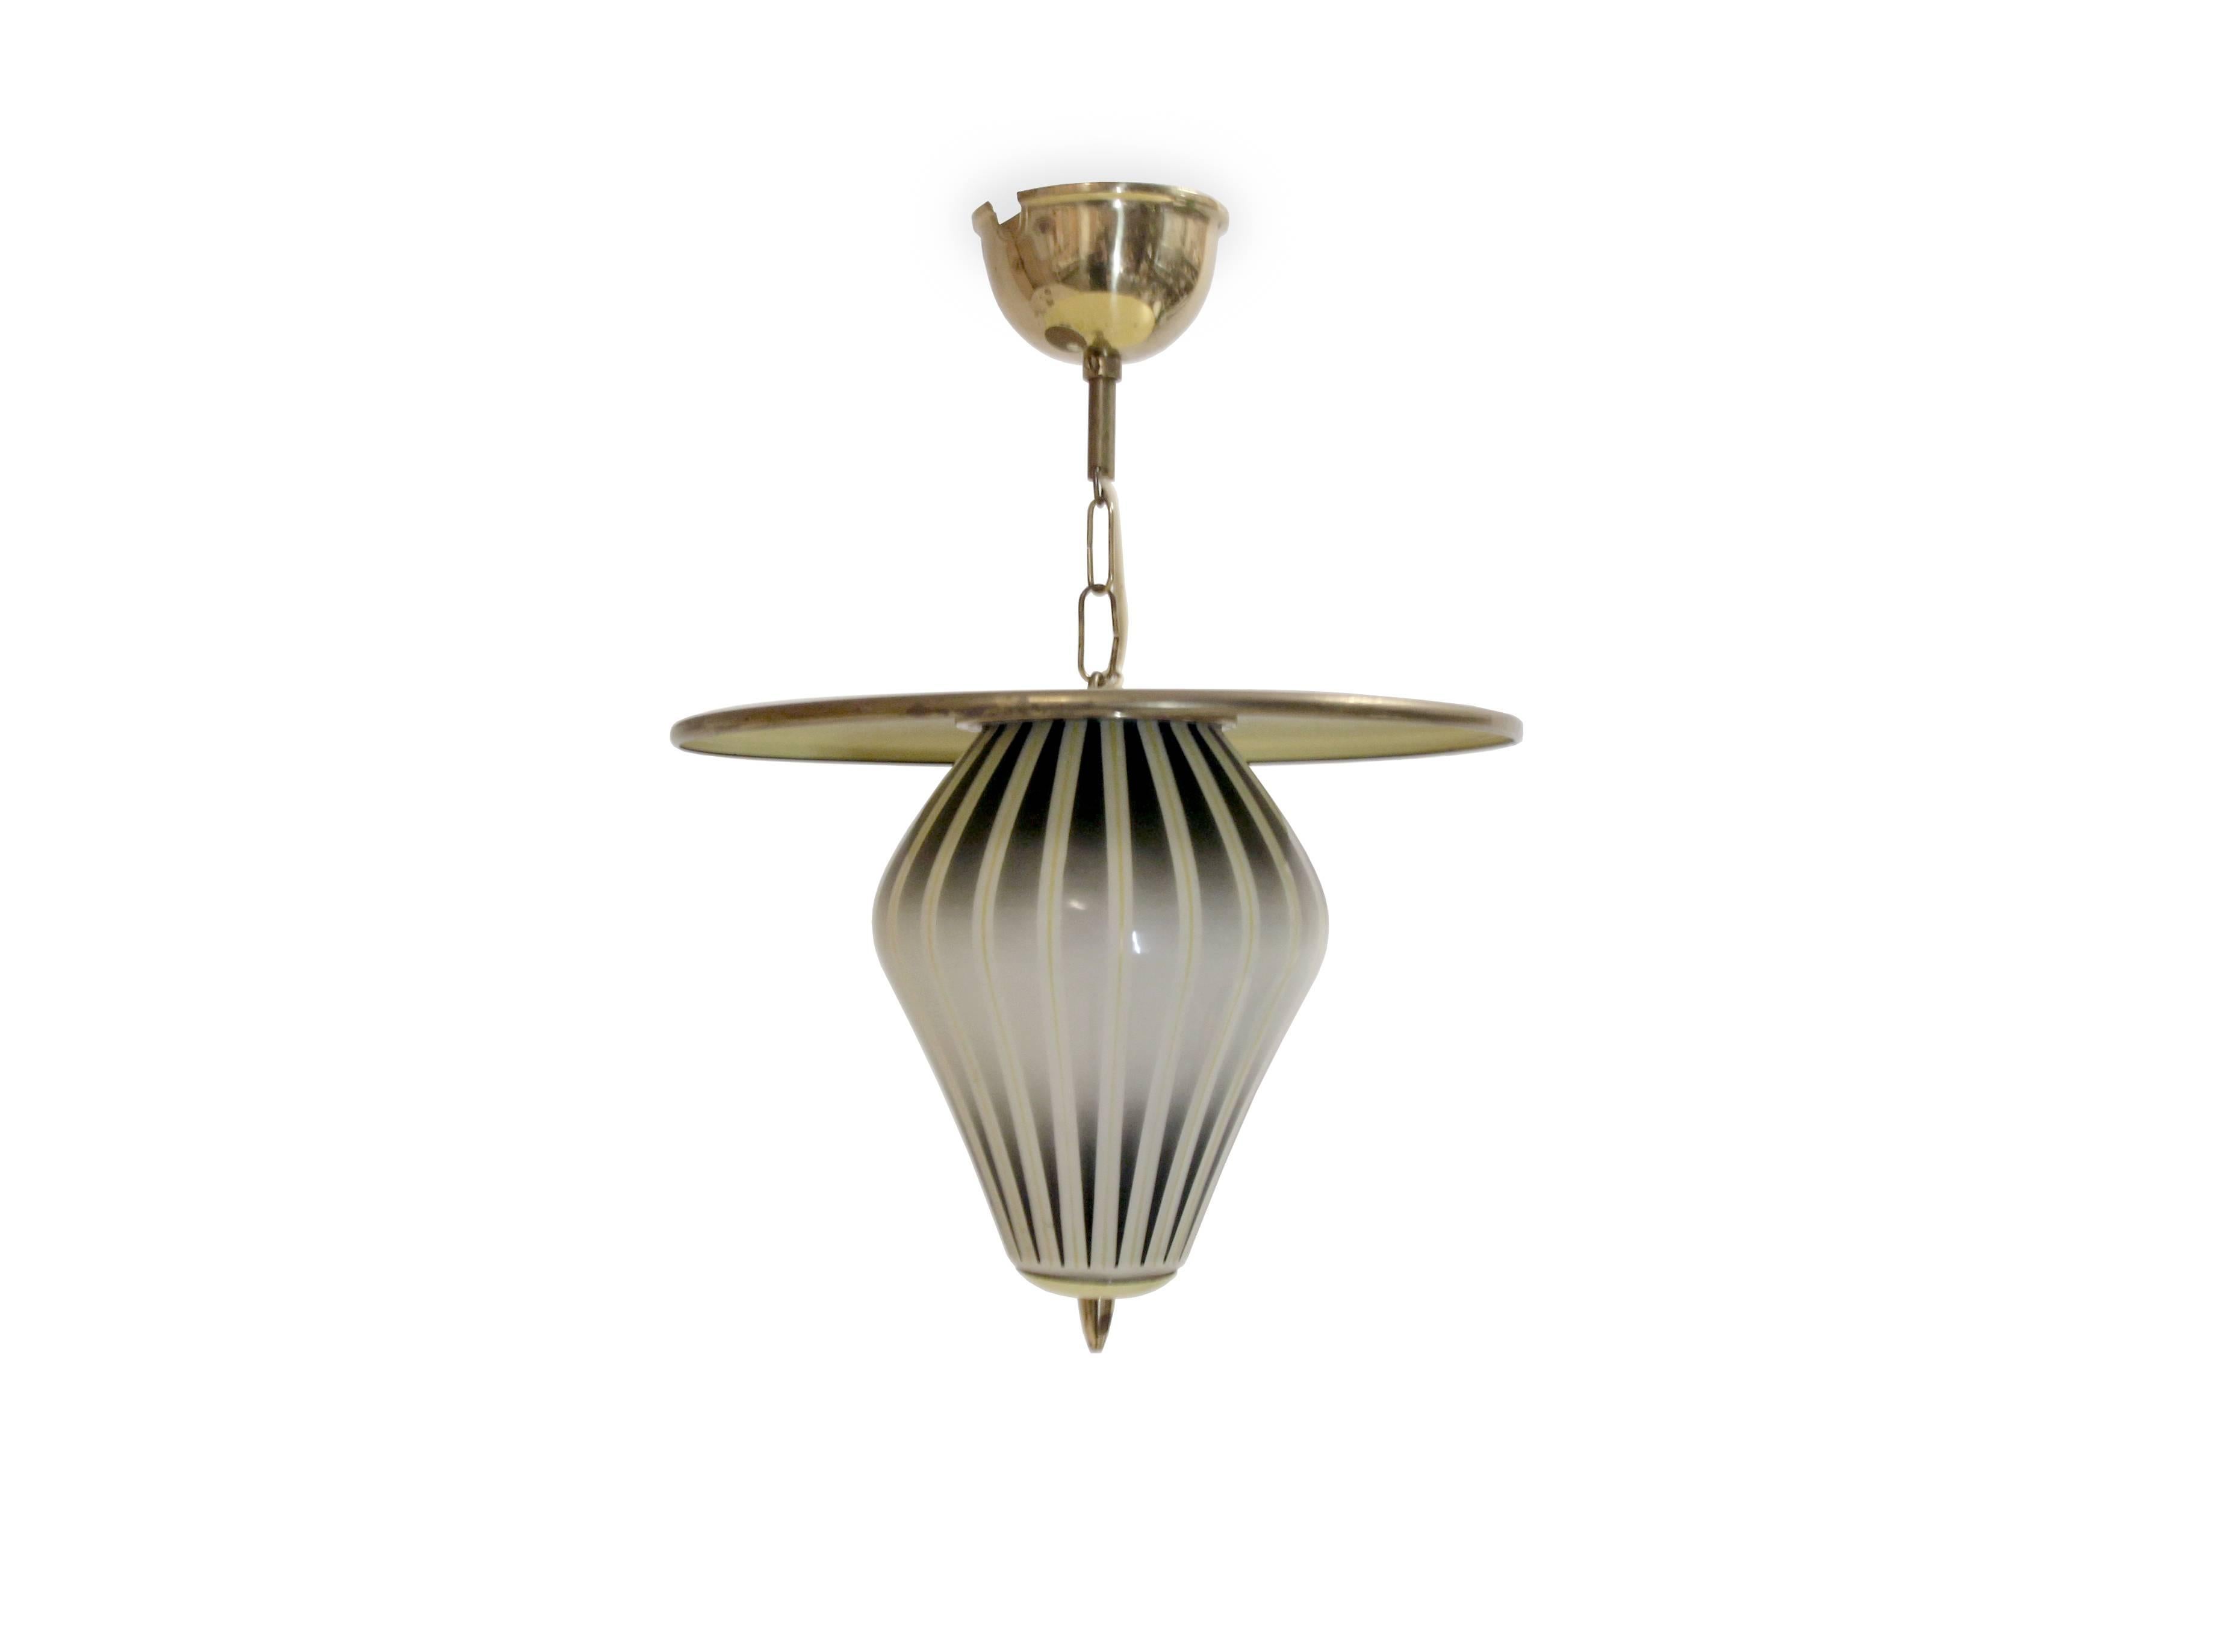 Wonderful and decorative ceiling lamp in steel, brass and shade in glass. Designed and made in Norway by Elegant Belysning from circa 1960s first half. The lamp is fully working and in good vintage condition. The lamp is fitted with one E27 bulb